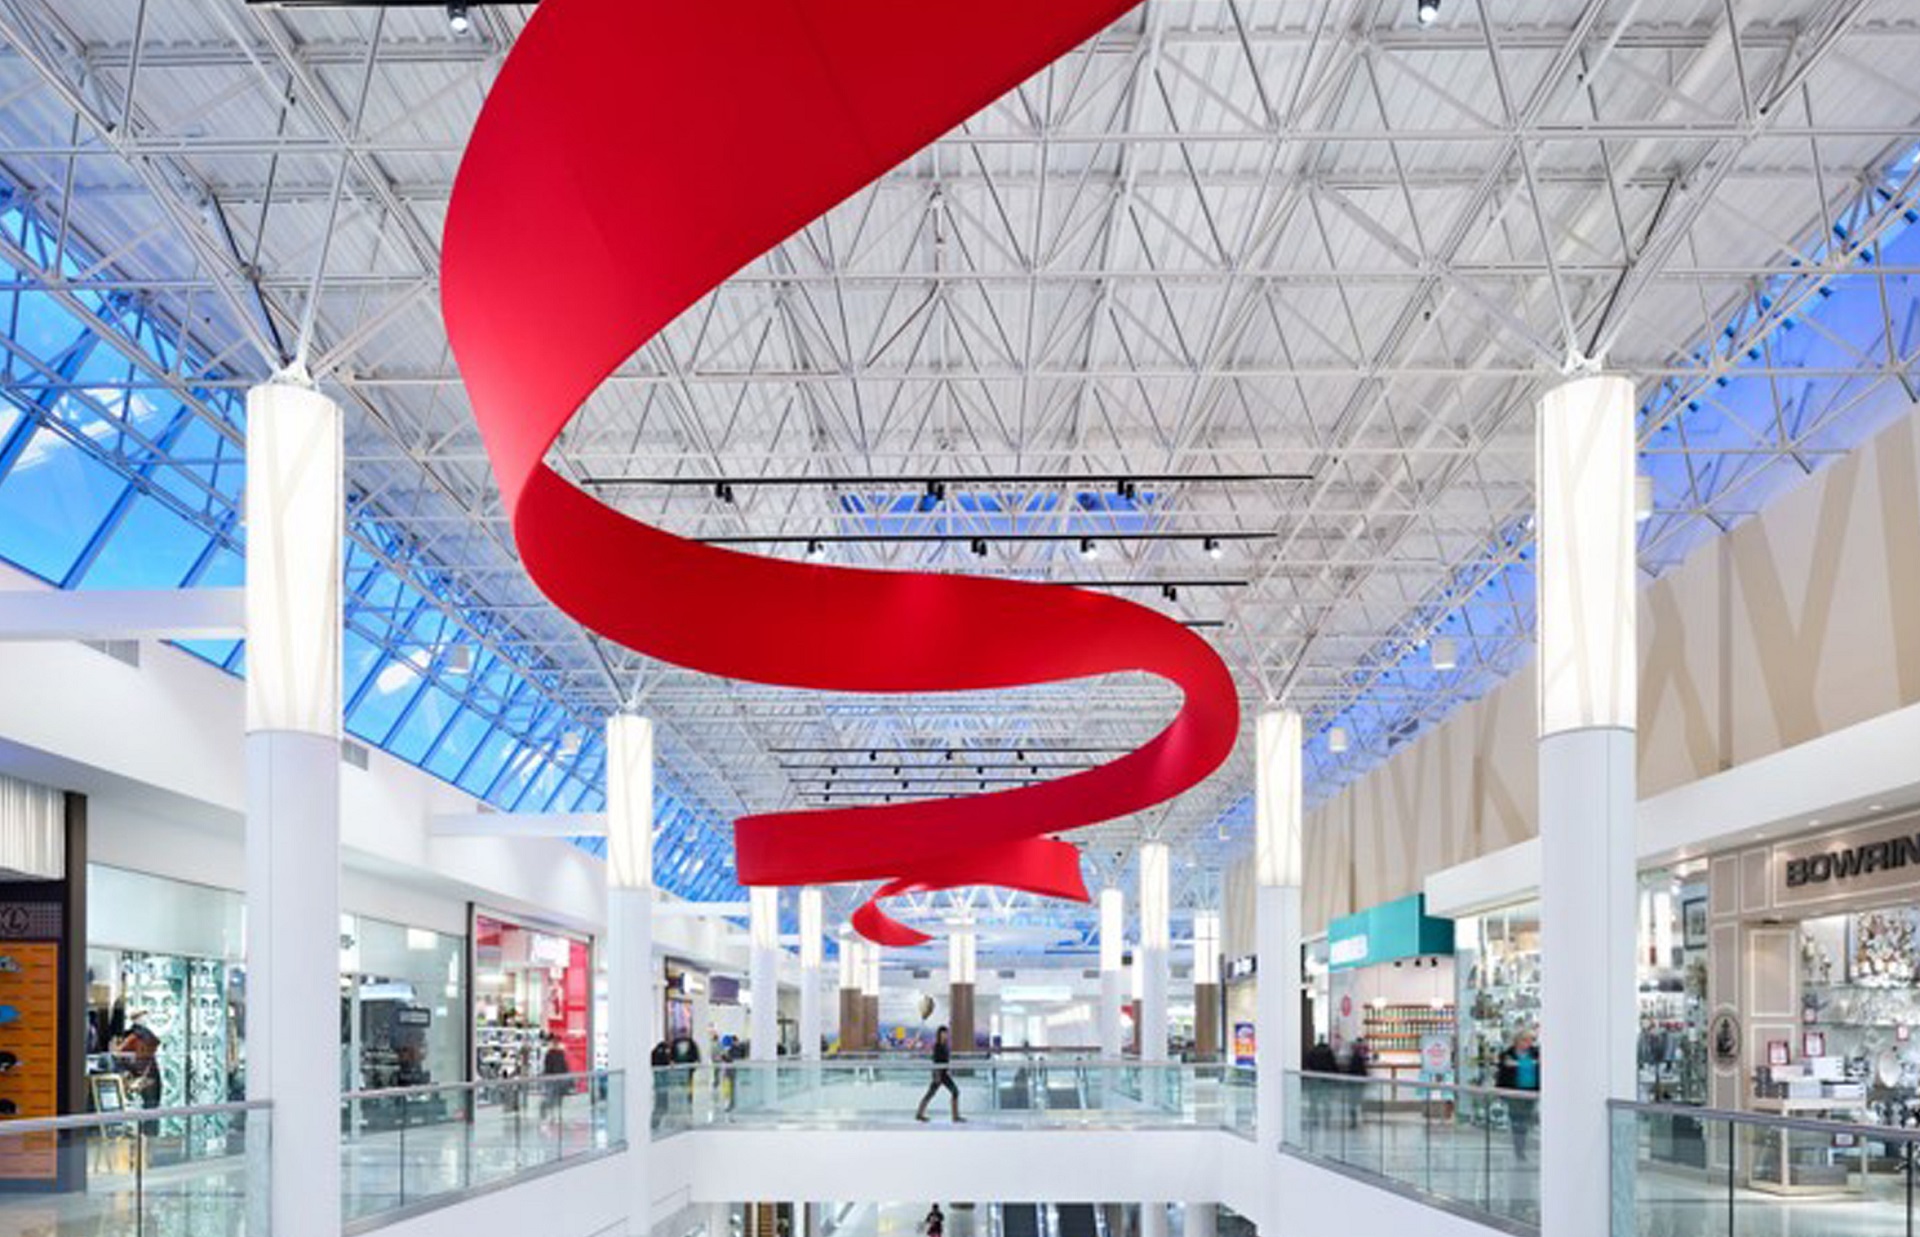 Installation resembling a red ribbon on the ceiling inside a shopping center